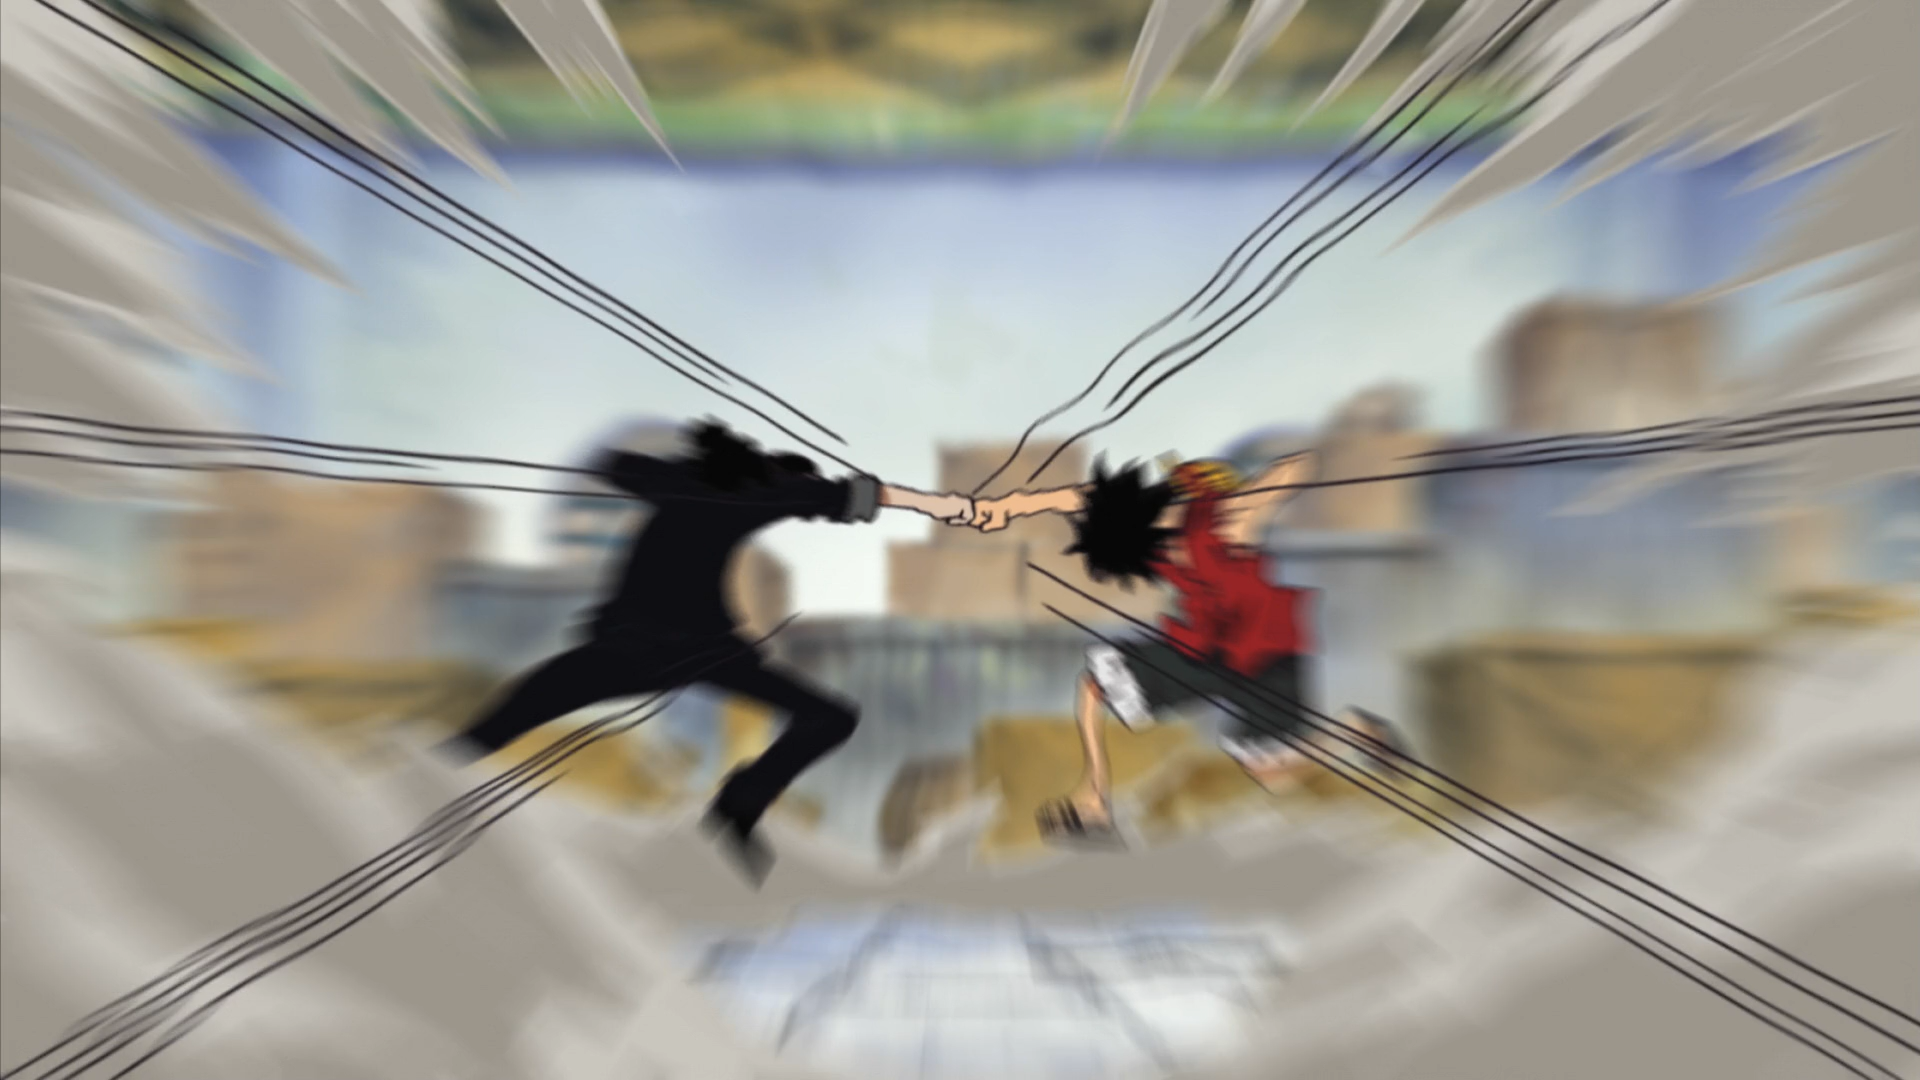 One Piece Wallpaper: One Piece Episode Luffy Vs Rob Lucci